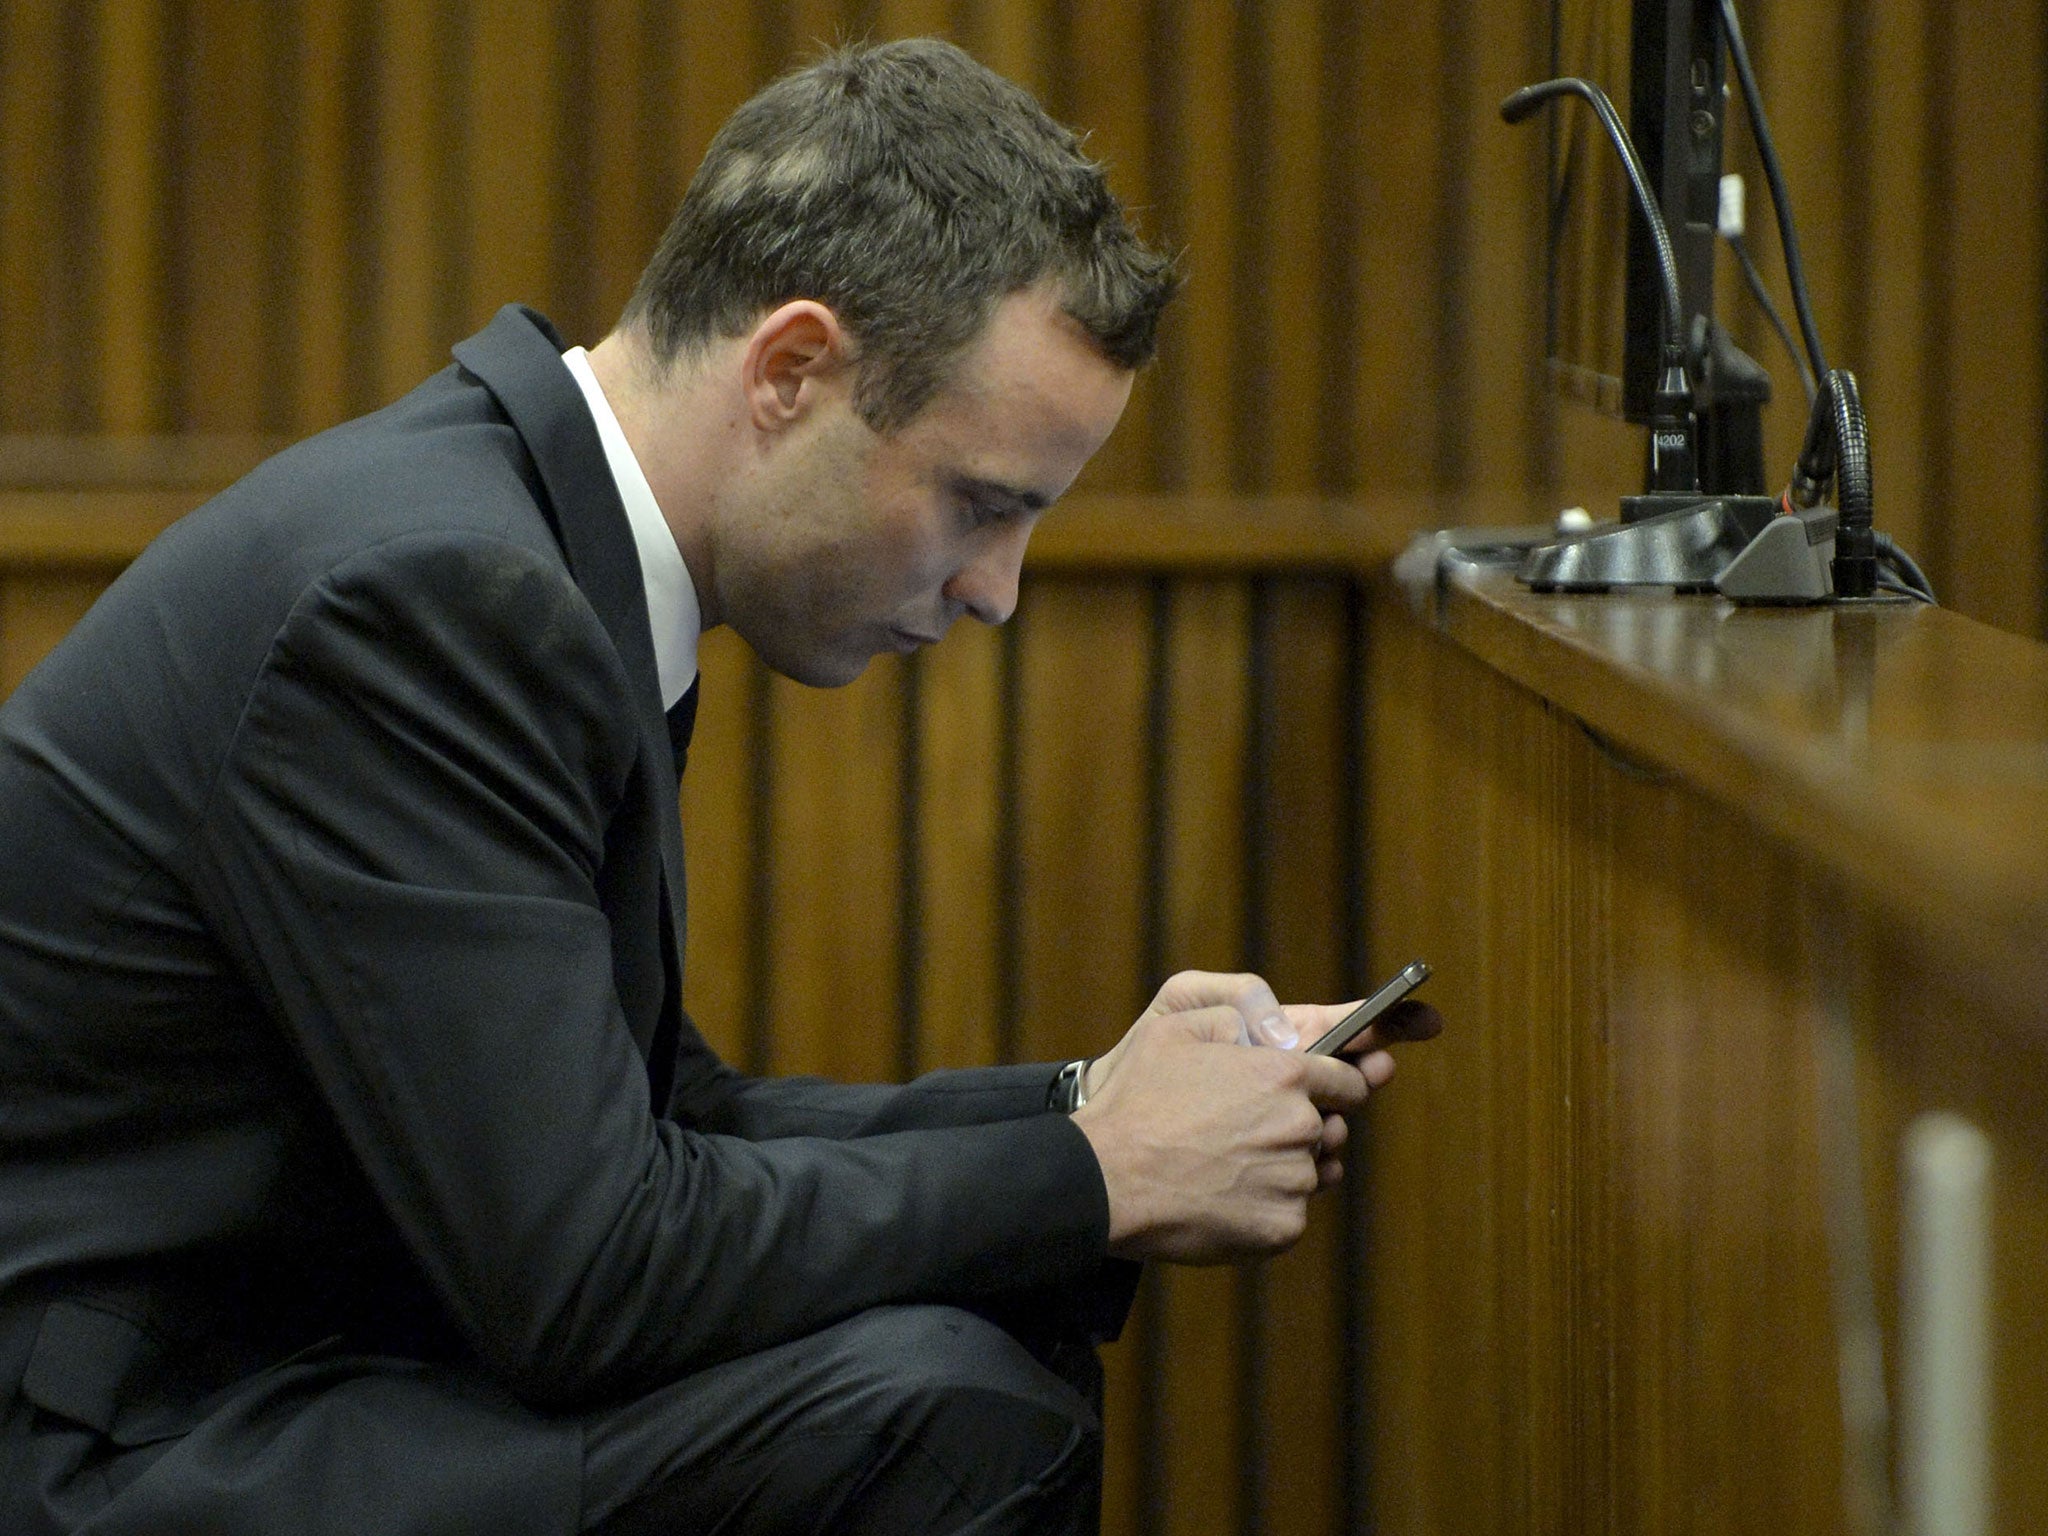 Pistorius posted four bizarre tweets across Sunday night and Monday morning